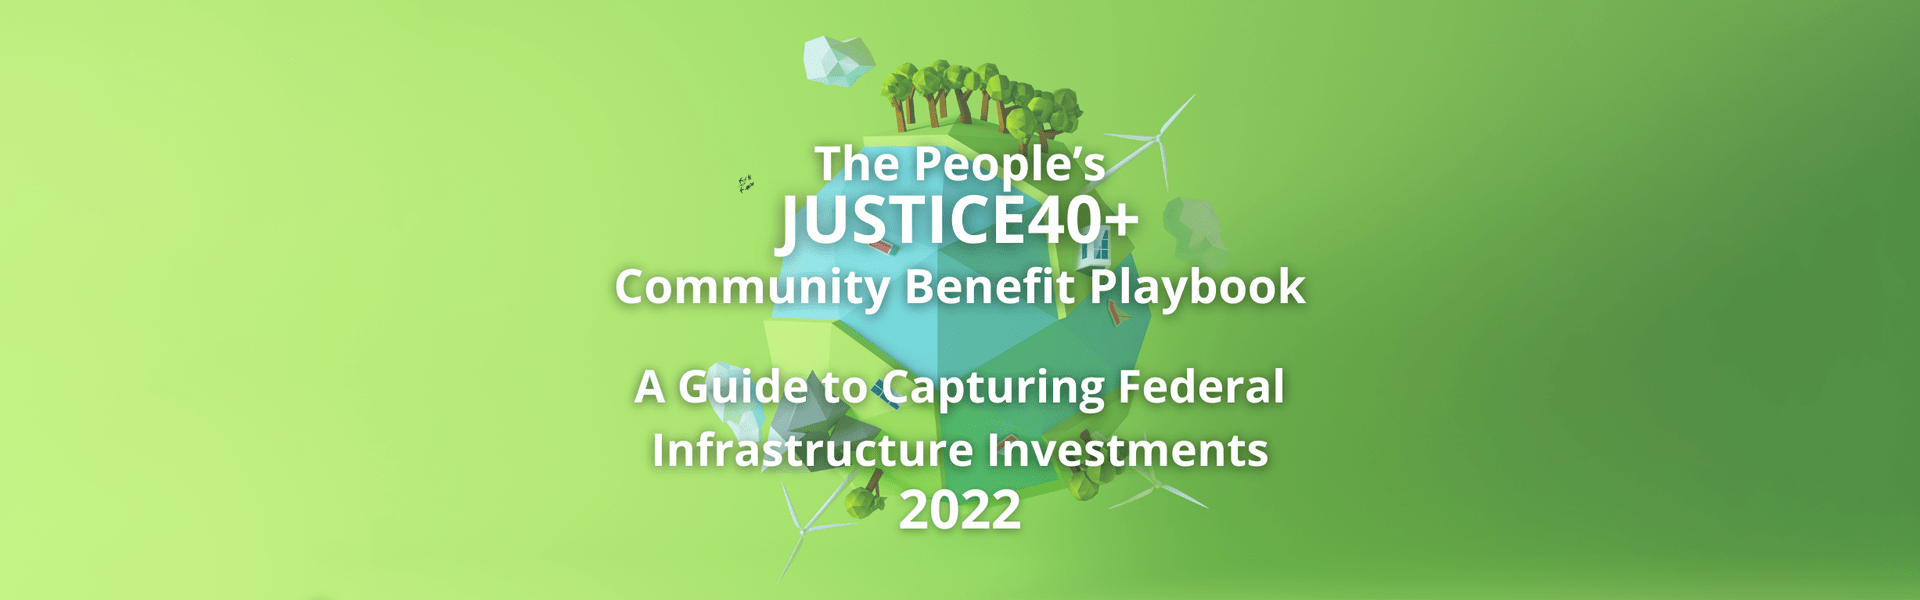 The People’s Justice40+ Community Benefit Playbook: A guide to capturing federal infrastructure investments 2022